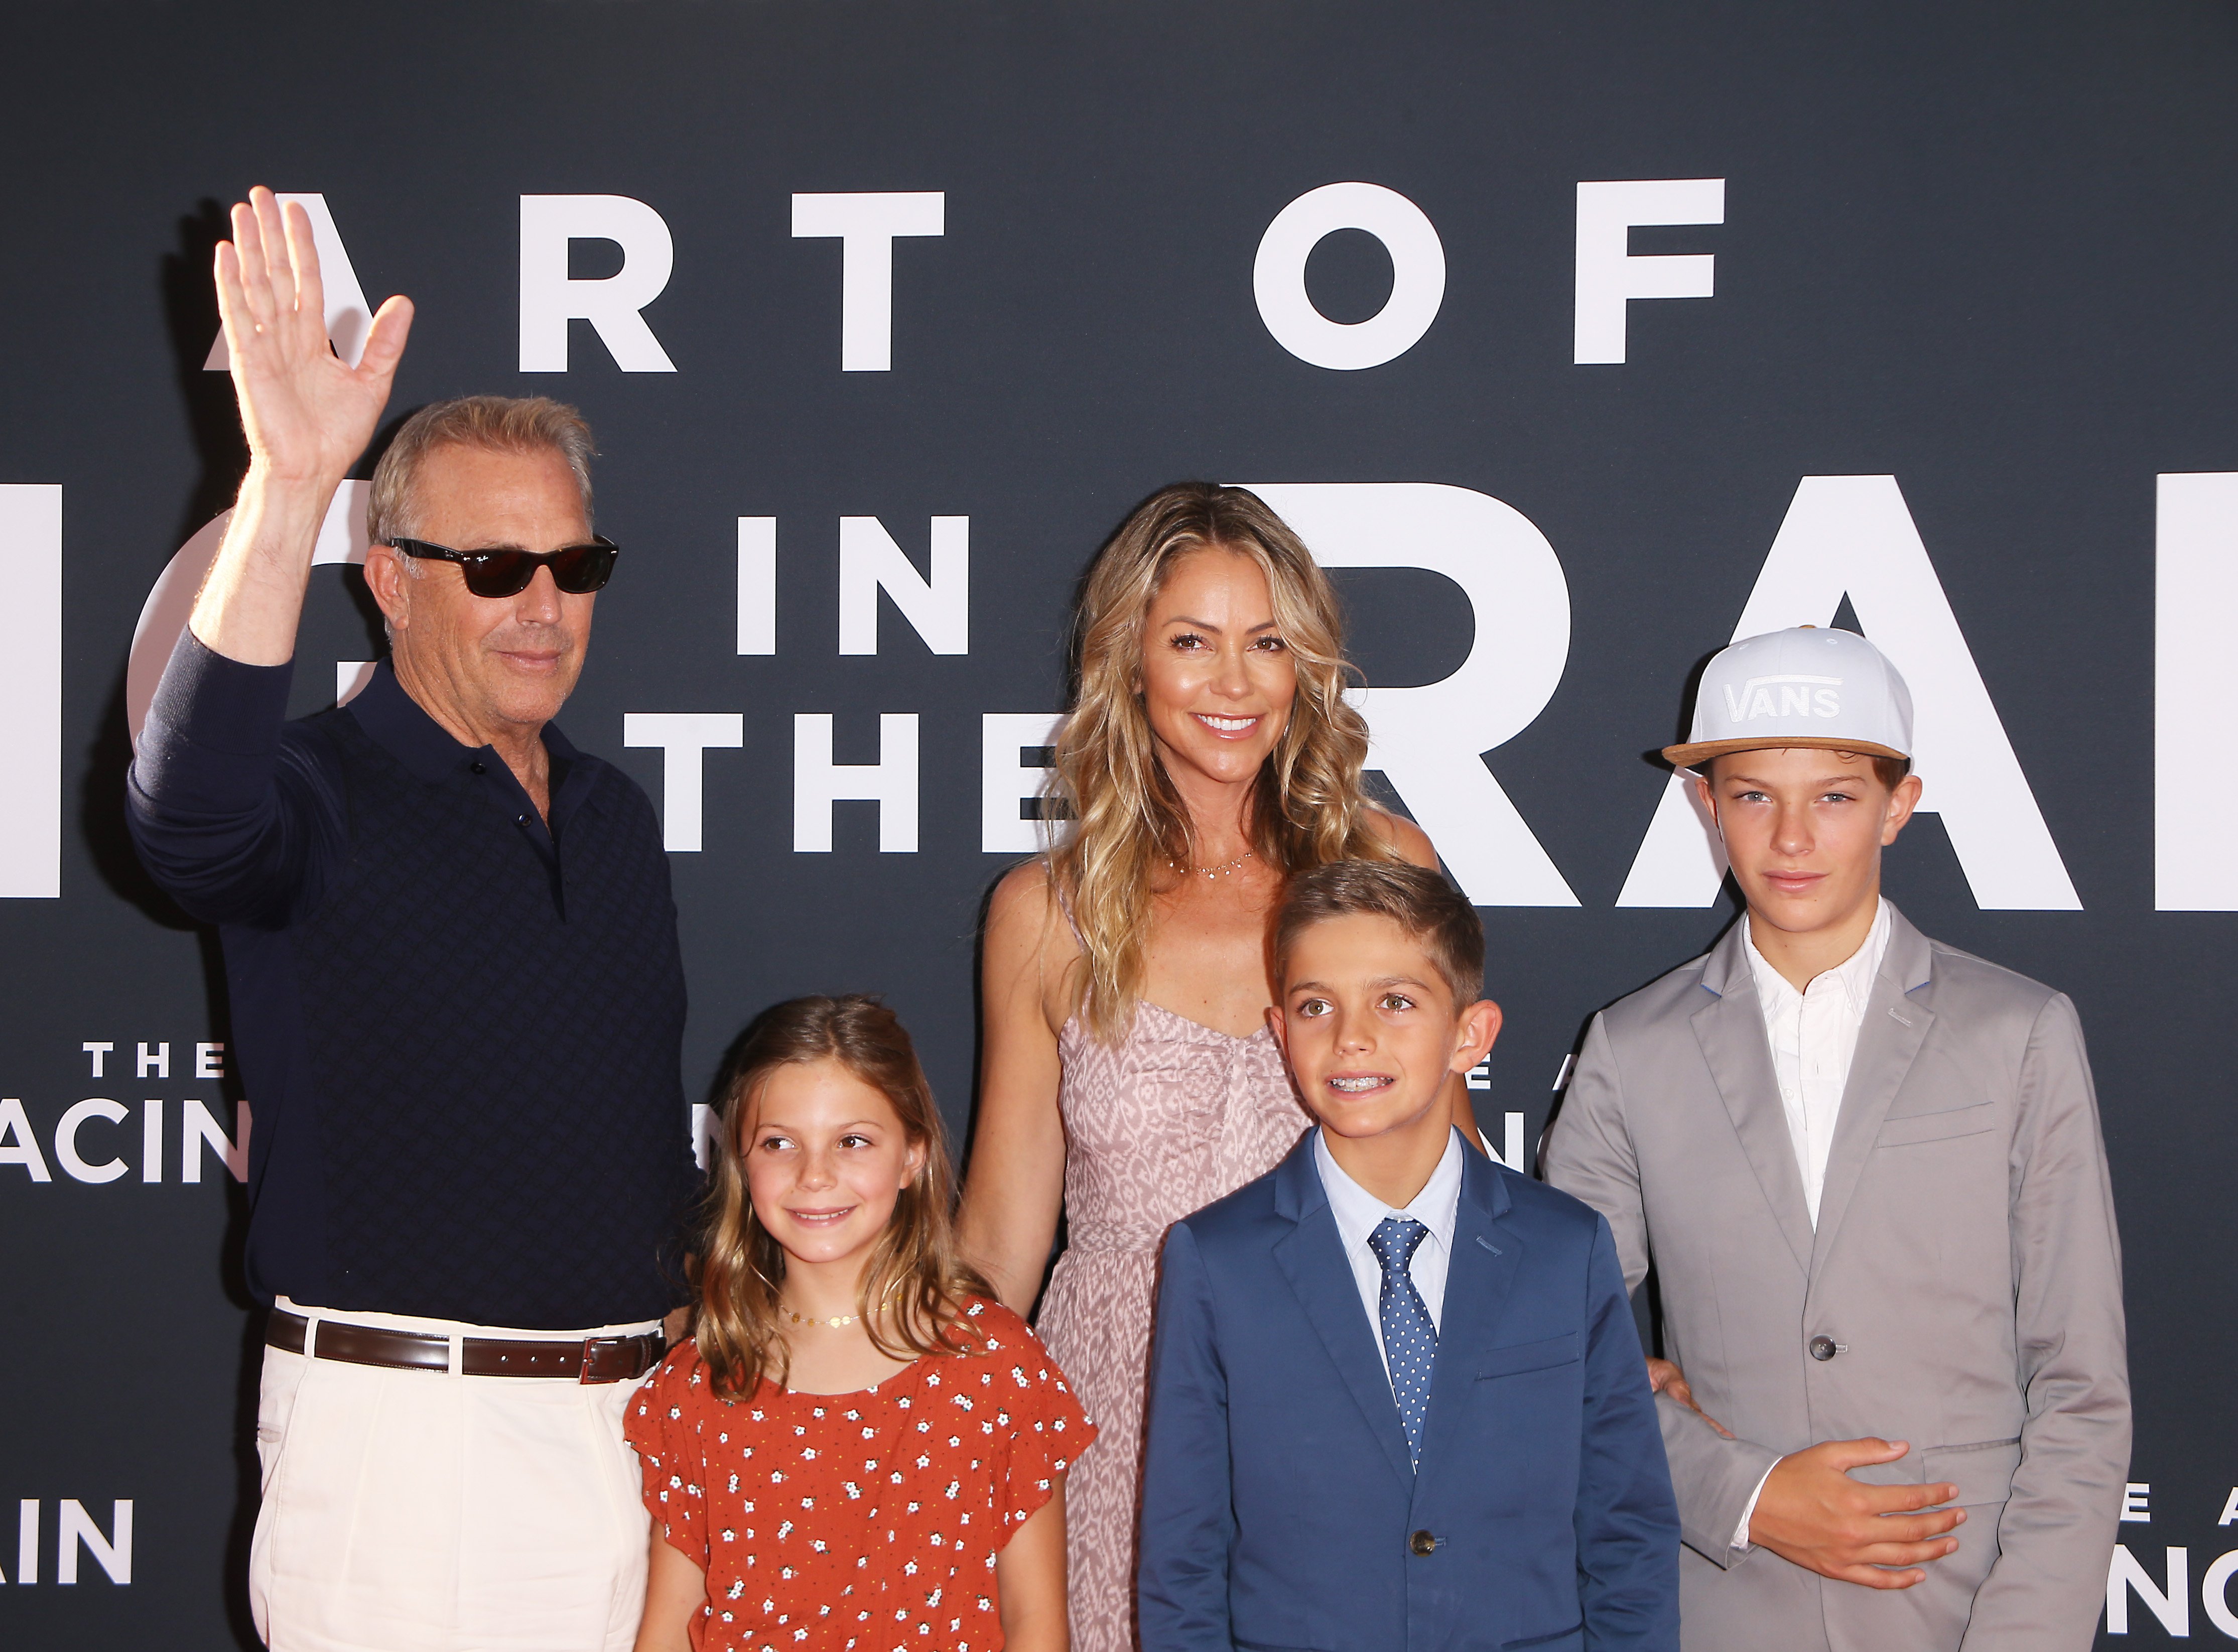 Kevin Costner, Christine Baumgartner, and their children Cayden, Hayes, and Grace at the Los Angeles premiere of "The Art of Racing In The Rain" on August 1, 2019, in Los Angeles, California | Source: Getty Images